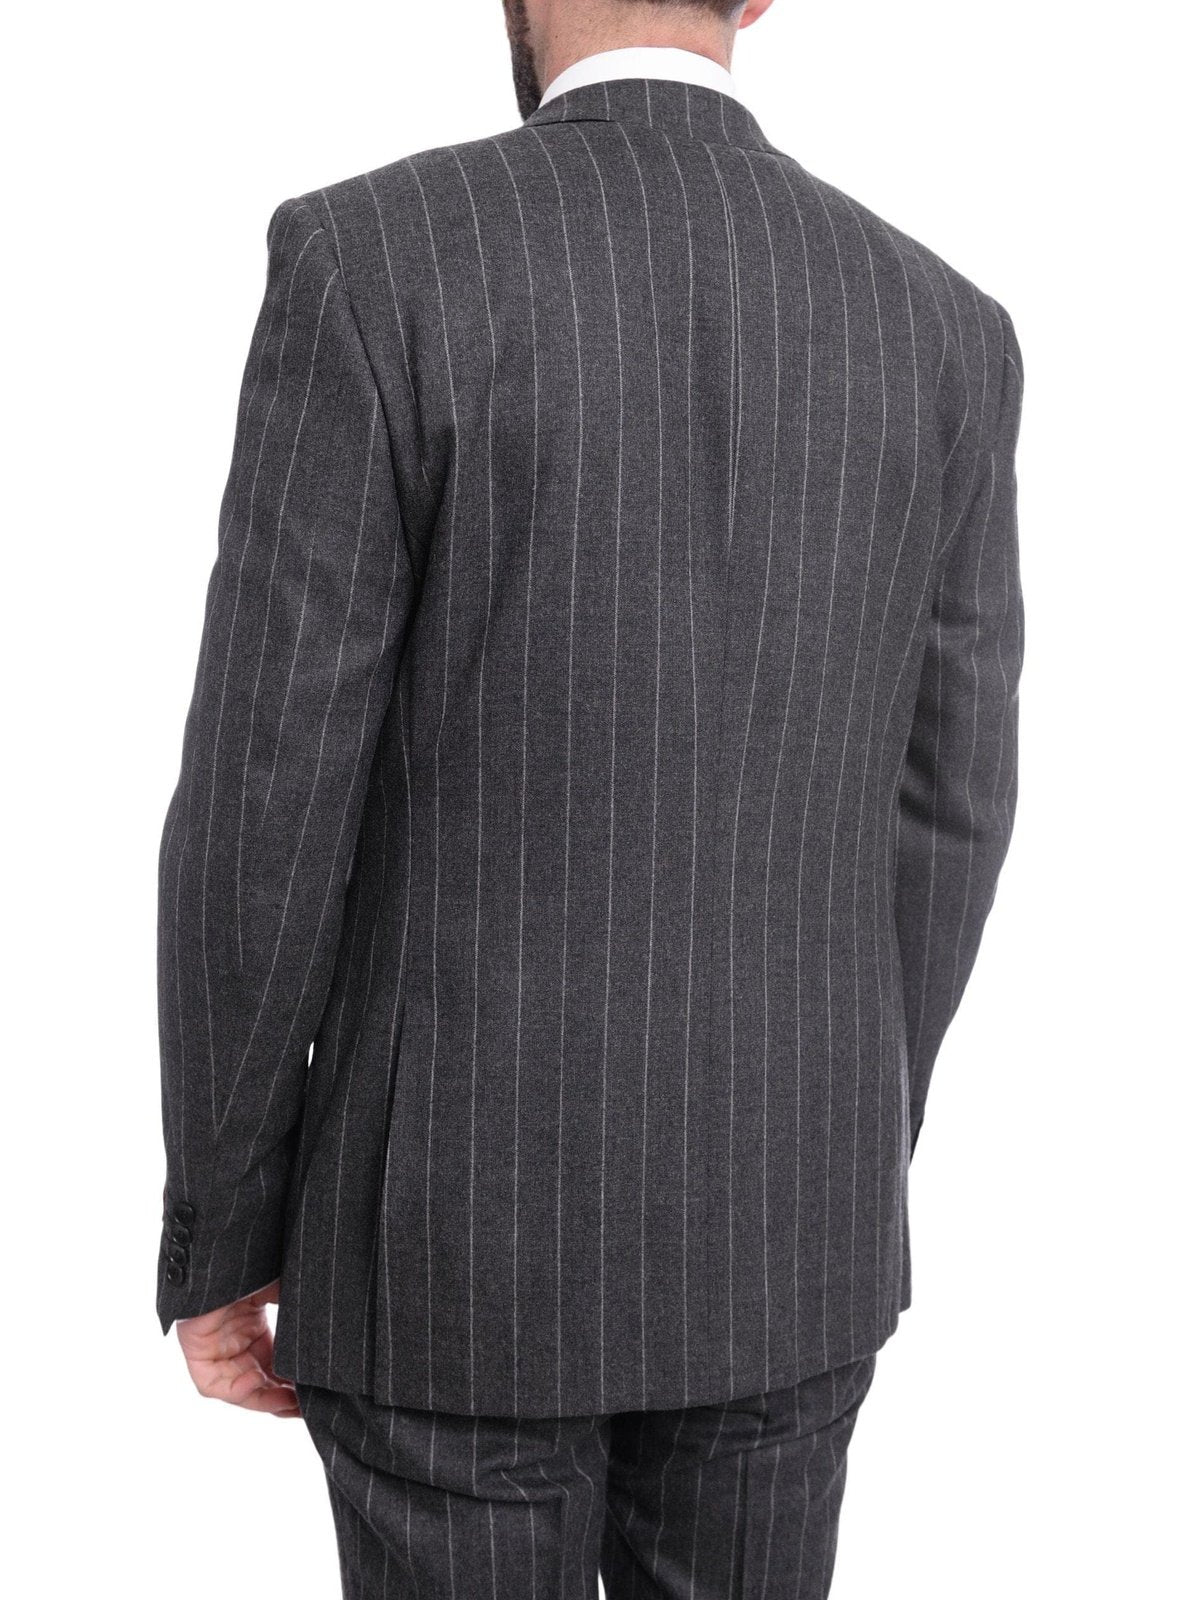 Napoli TWO PIECE SUITS Napoli Slim Fit Charcoal Gray Pinstriped Two Button Half Canvassed Wool Suit